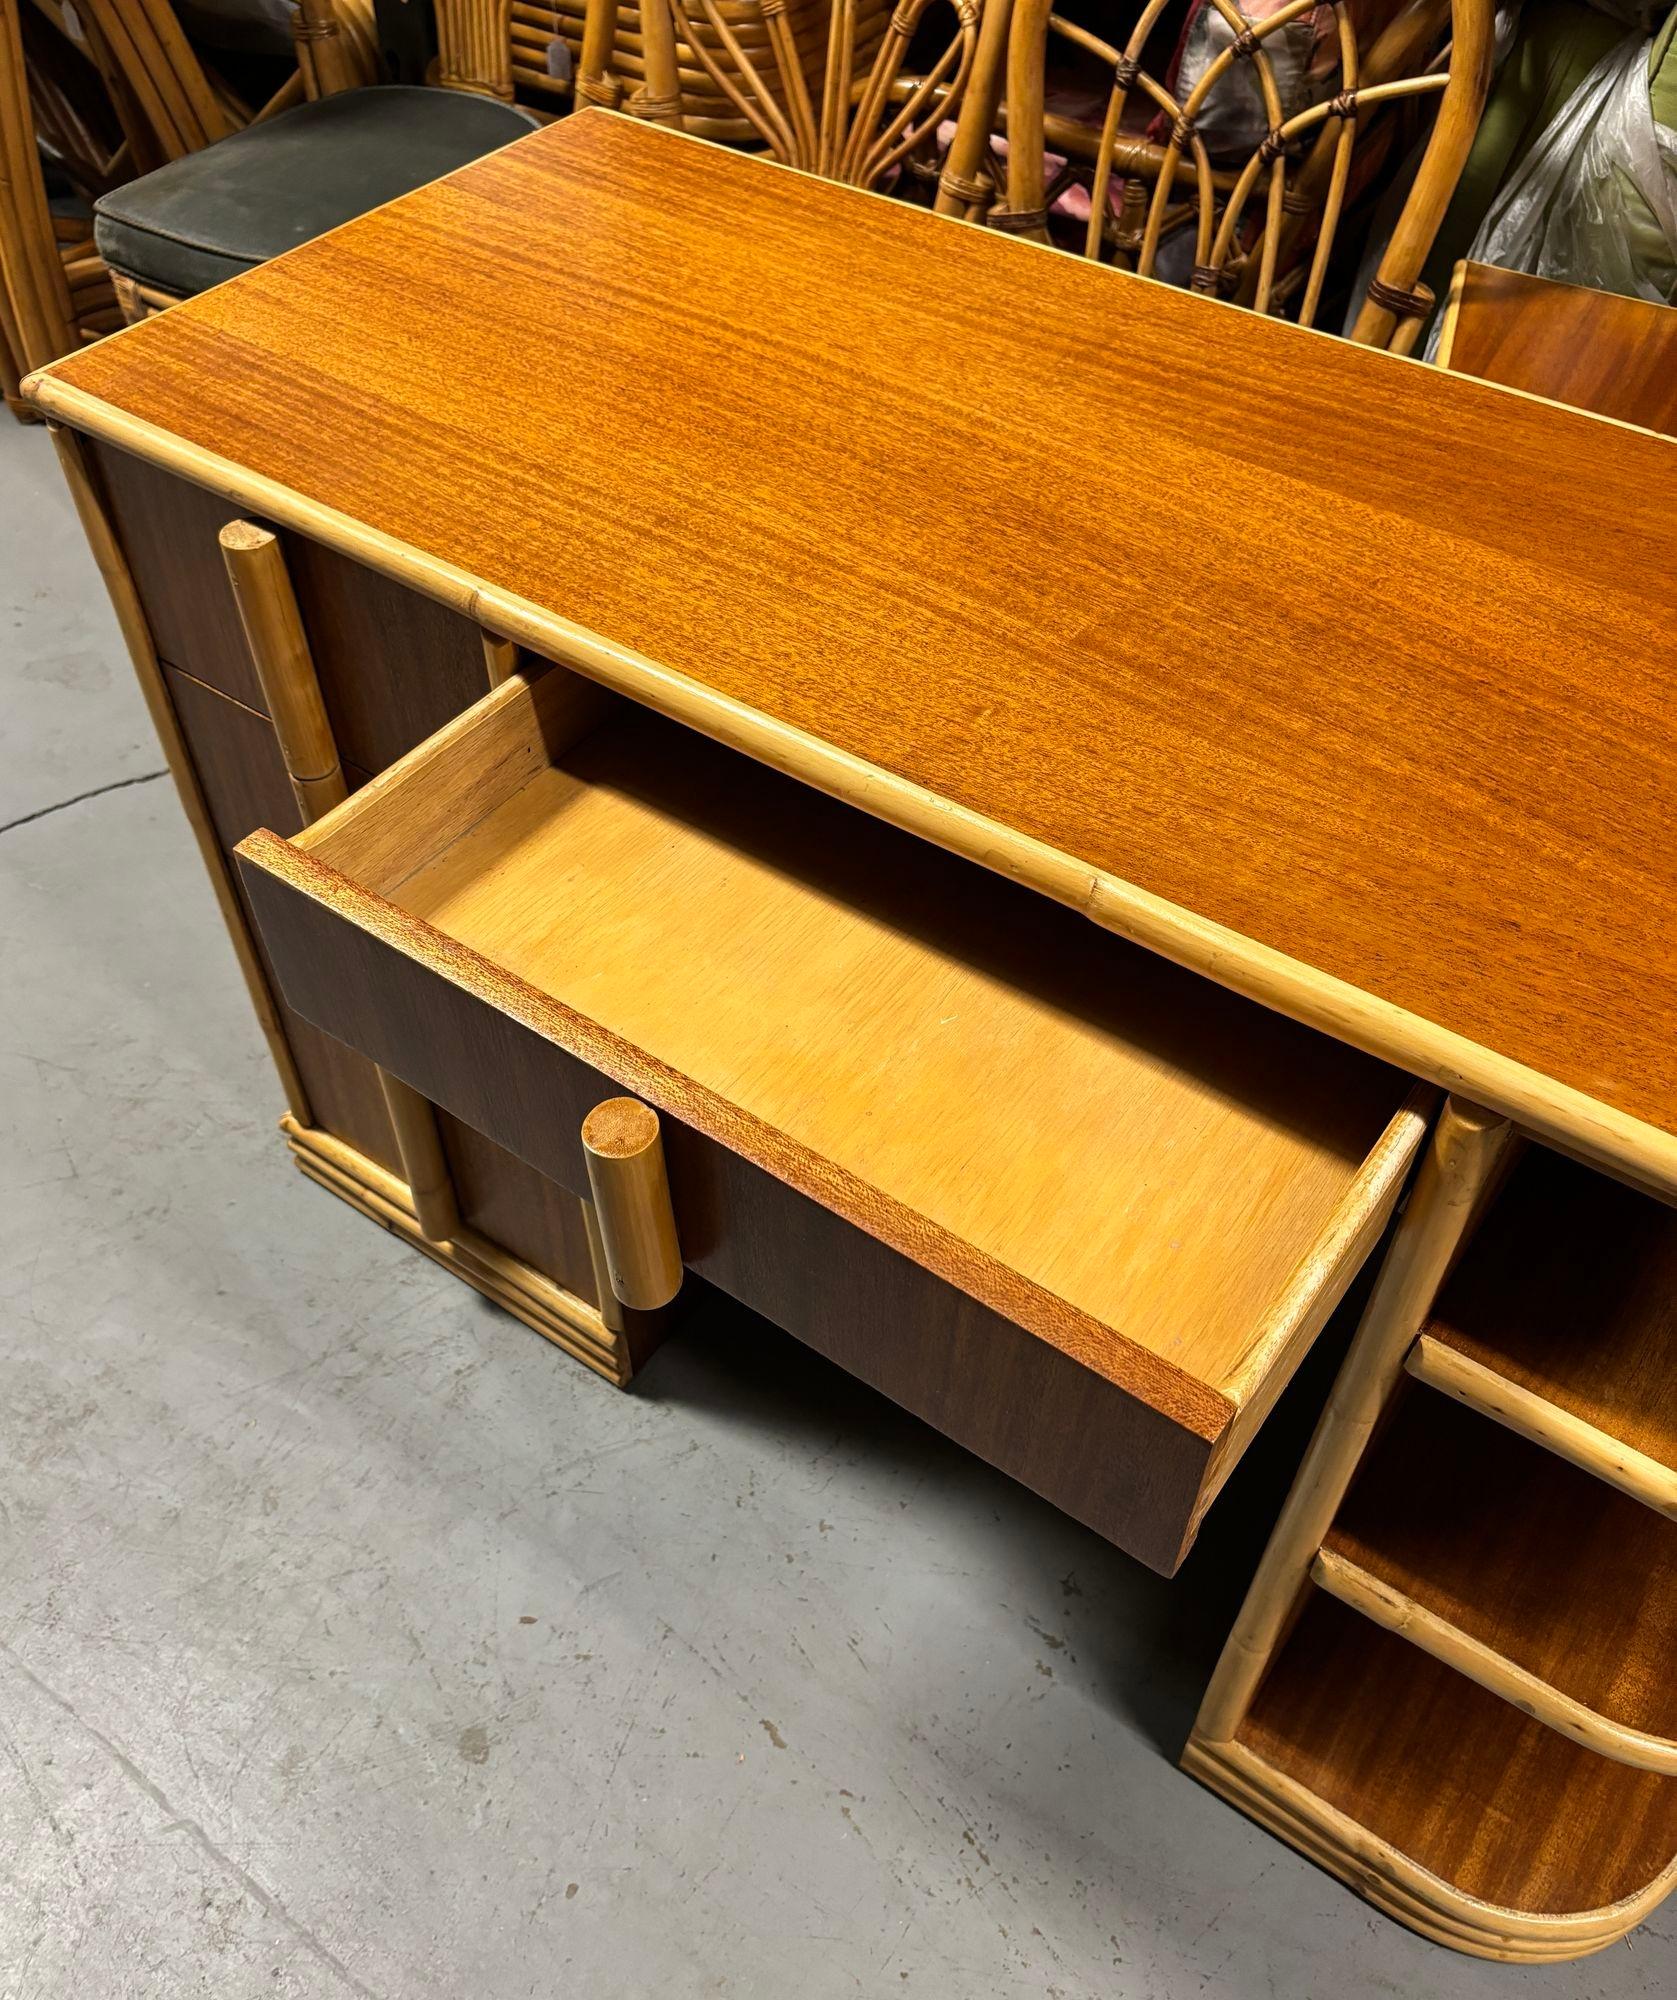 Streamline Mahogany and Rattan Writing Desk with Rattan Pulls & Shelf In Excellent Condition For Sale In Van Nuys, CA